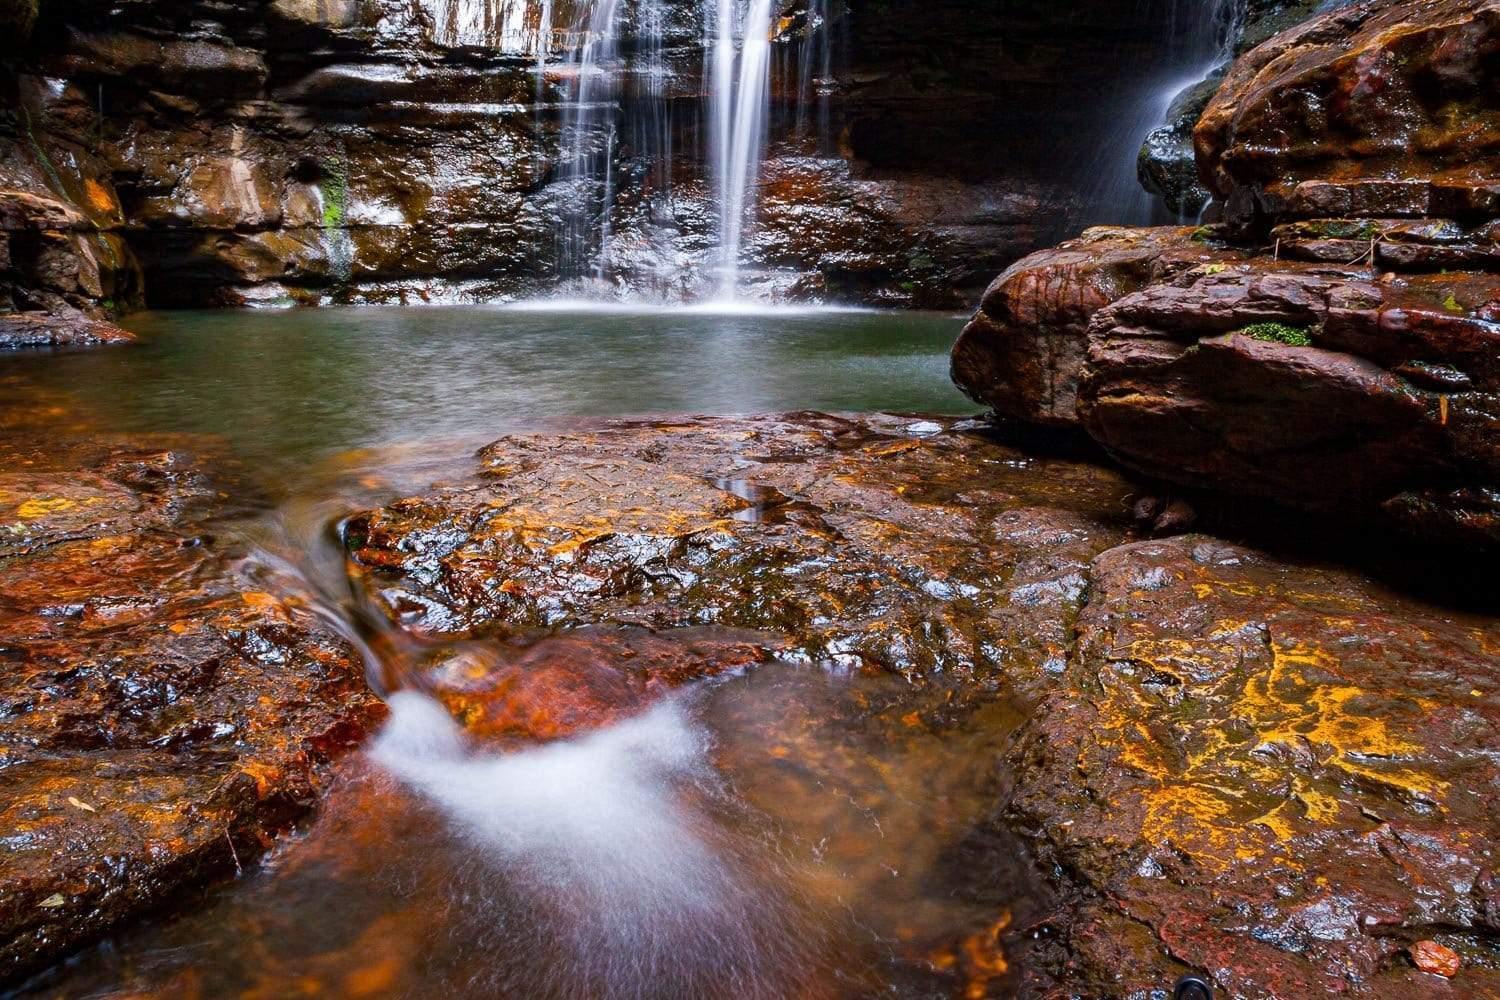 A beautiful waterfall from rock of orange and dark brown shade, some flat stones on the ground with the overflow of the water, Empress Falls - Blue Mountains NSW